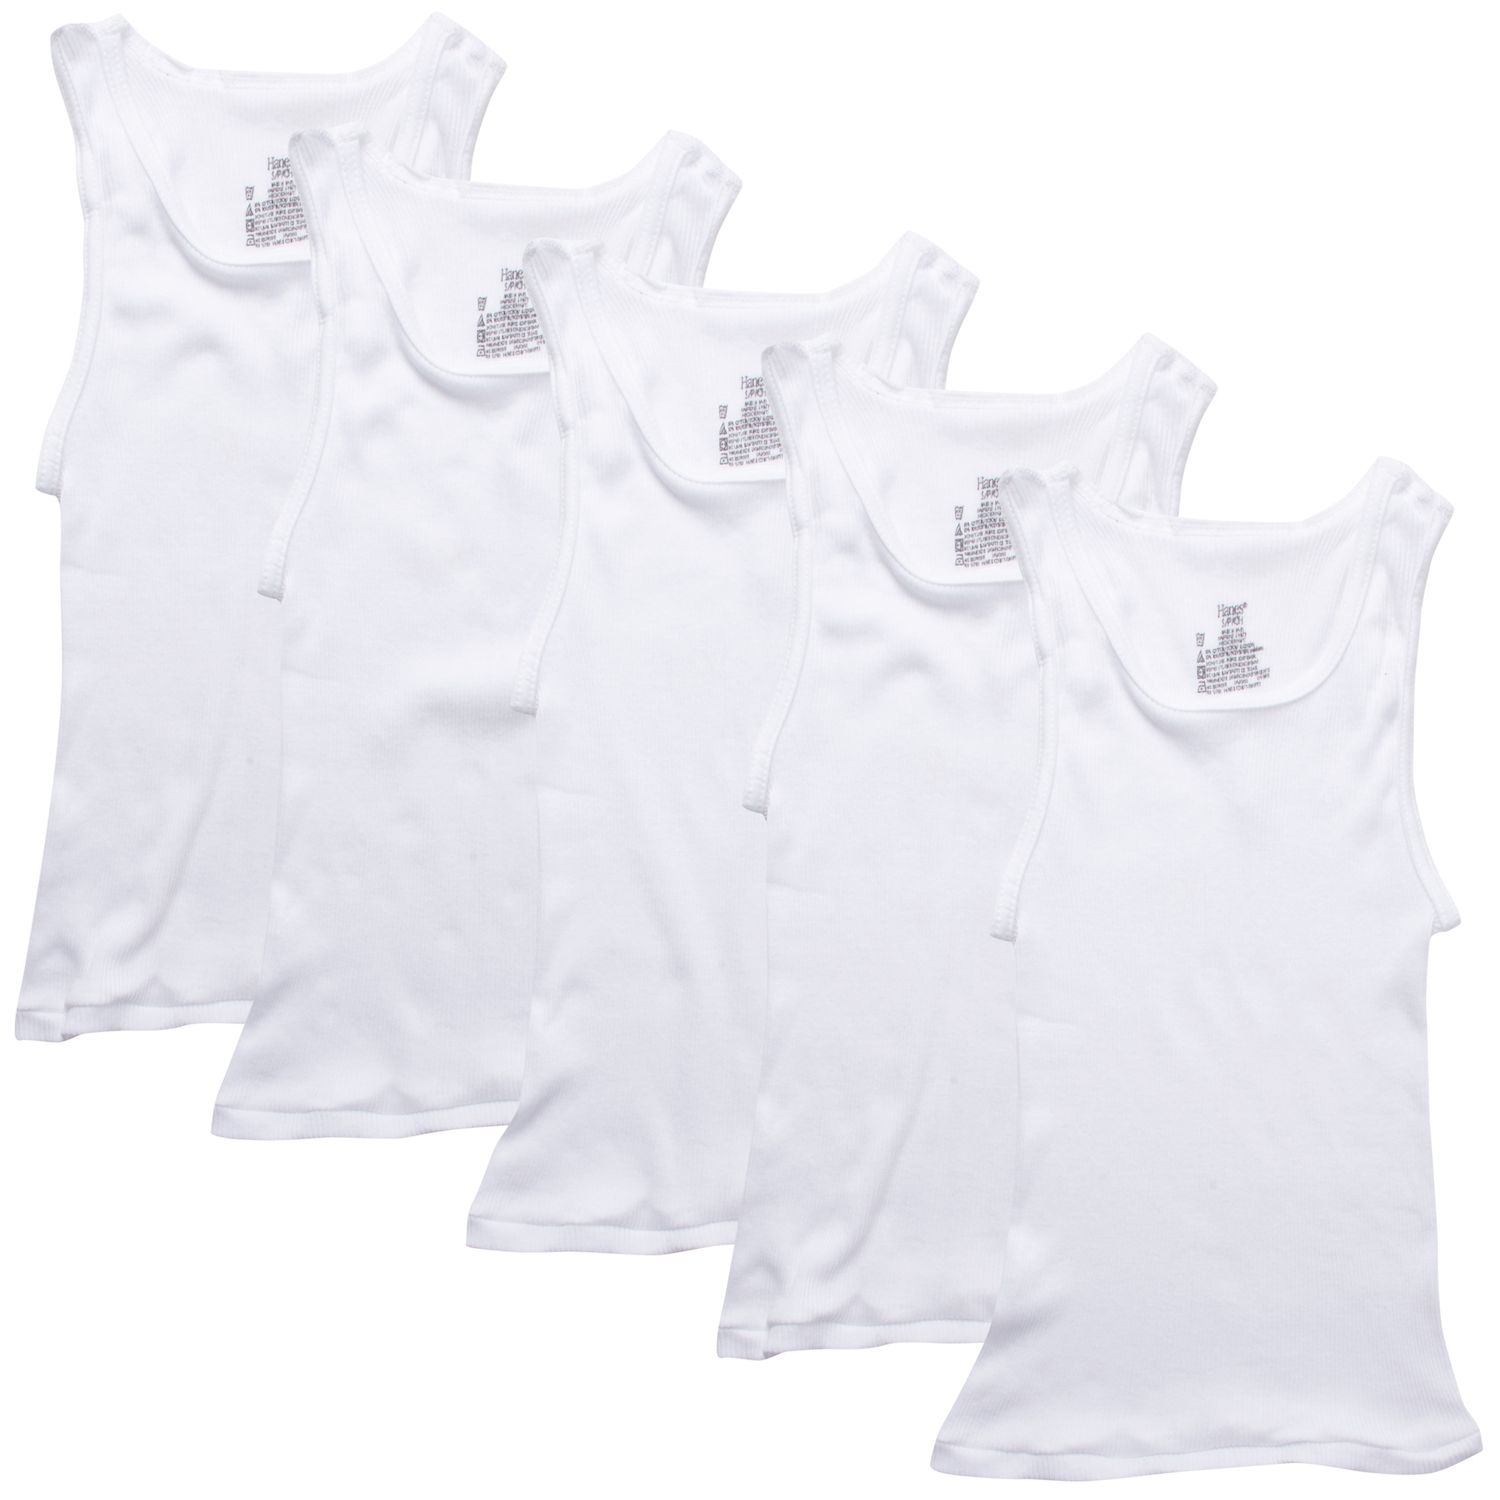 Image for Hanes Boys 4-20 Classics 5-pack ComfortSoft Tanks at Kohl's.